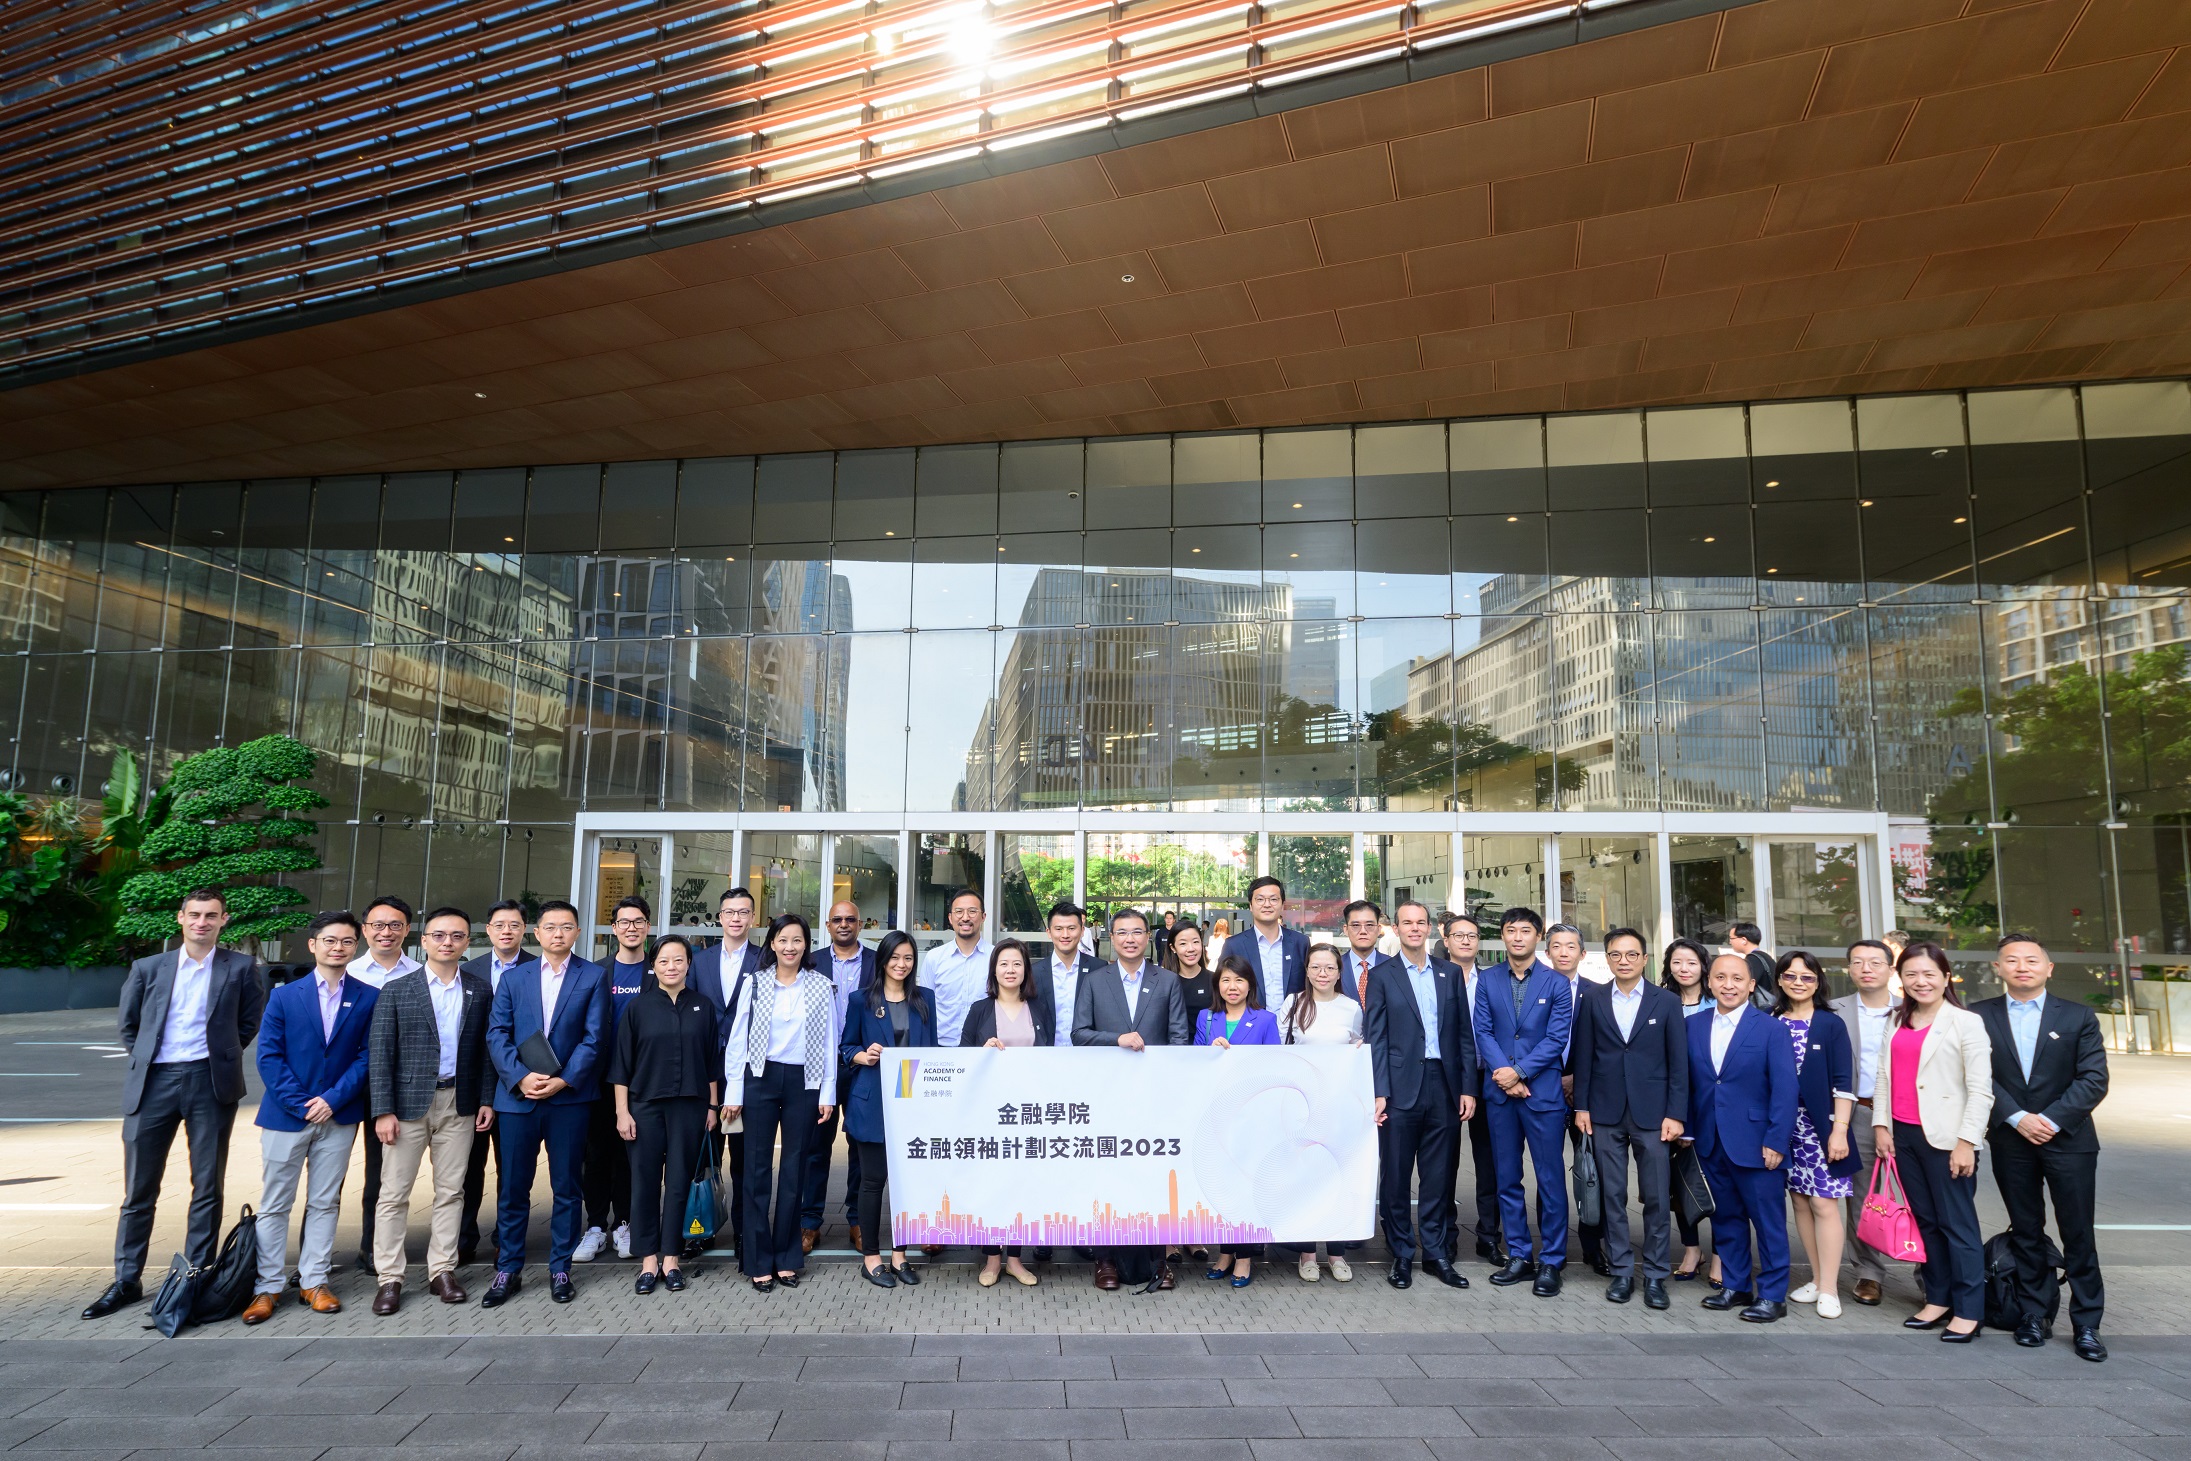 A total of 30 participants from both 2022 and 2023 Hong Kong Academy of Finance’s Financial Leaders Programme cohorts participate the first field trip to Shenzhen.